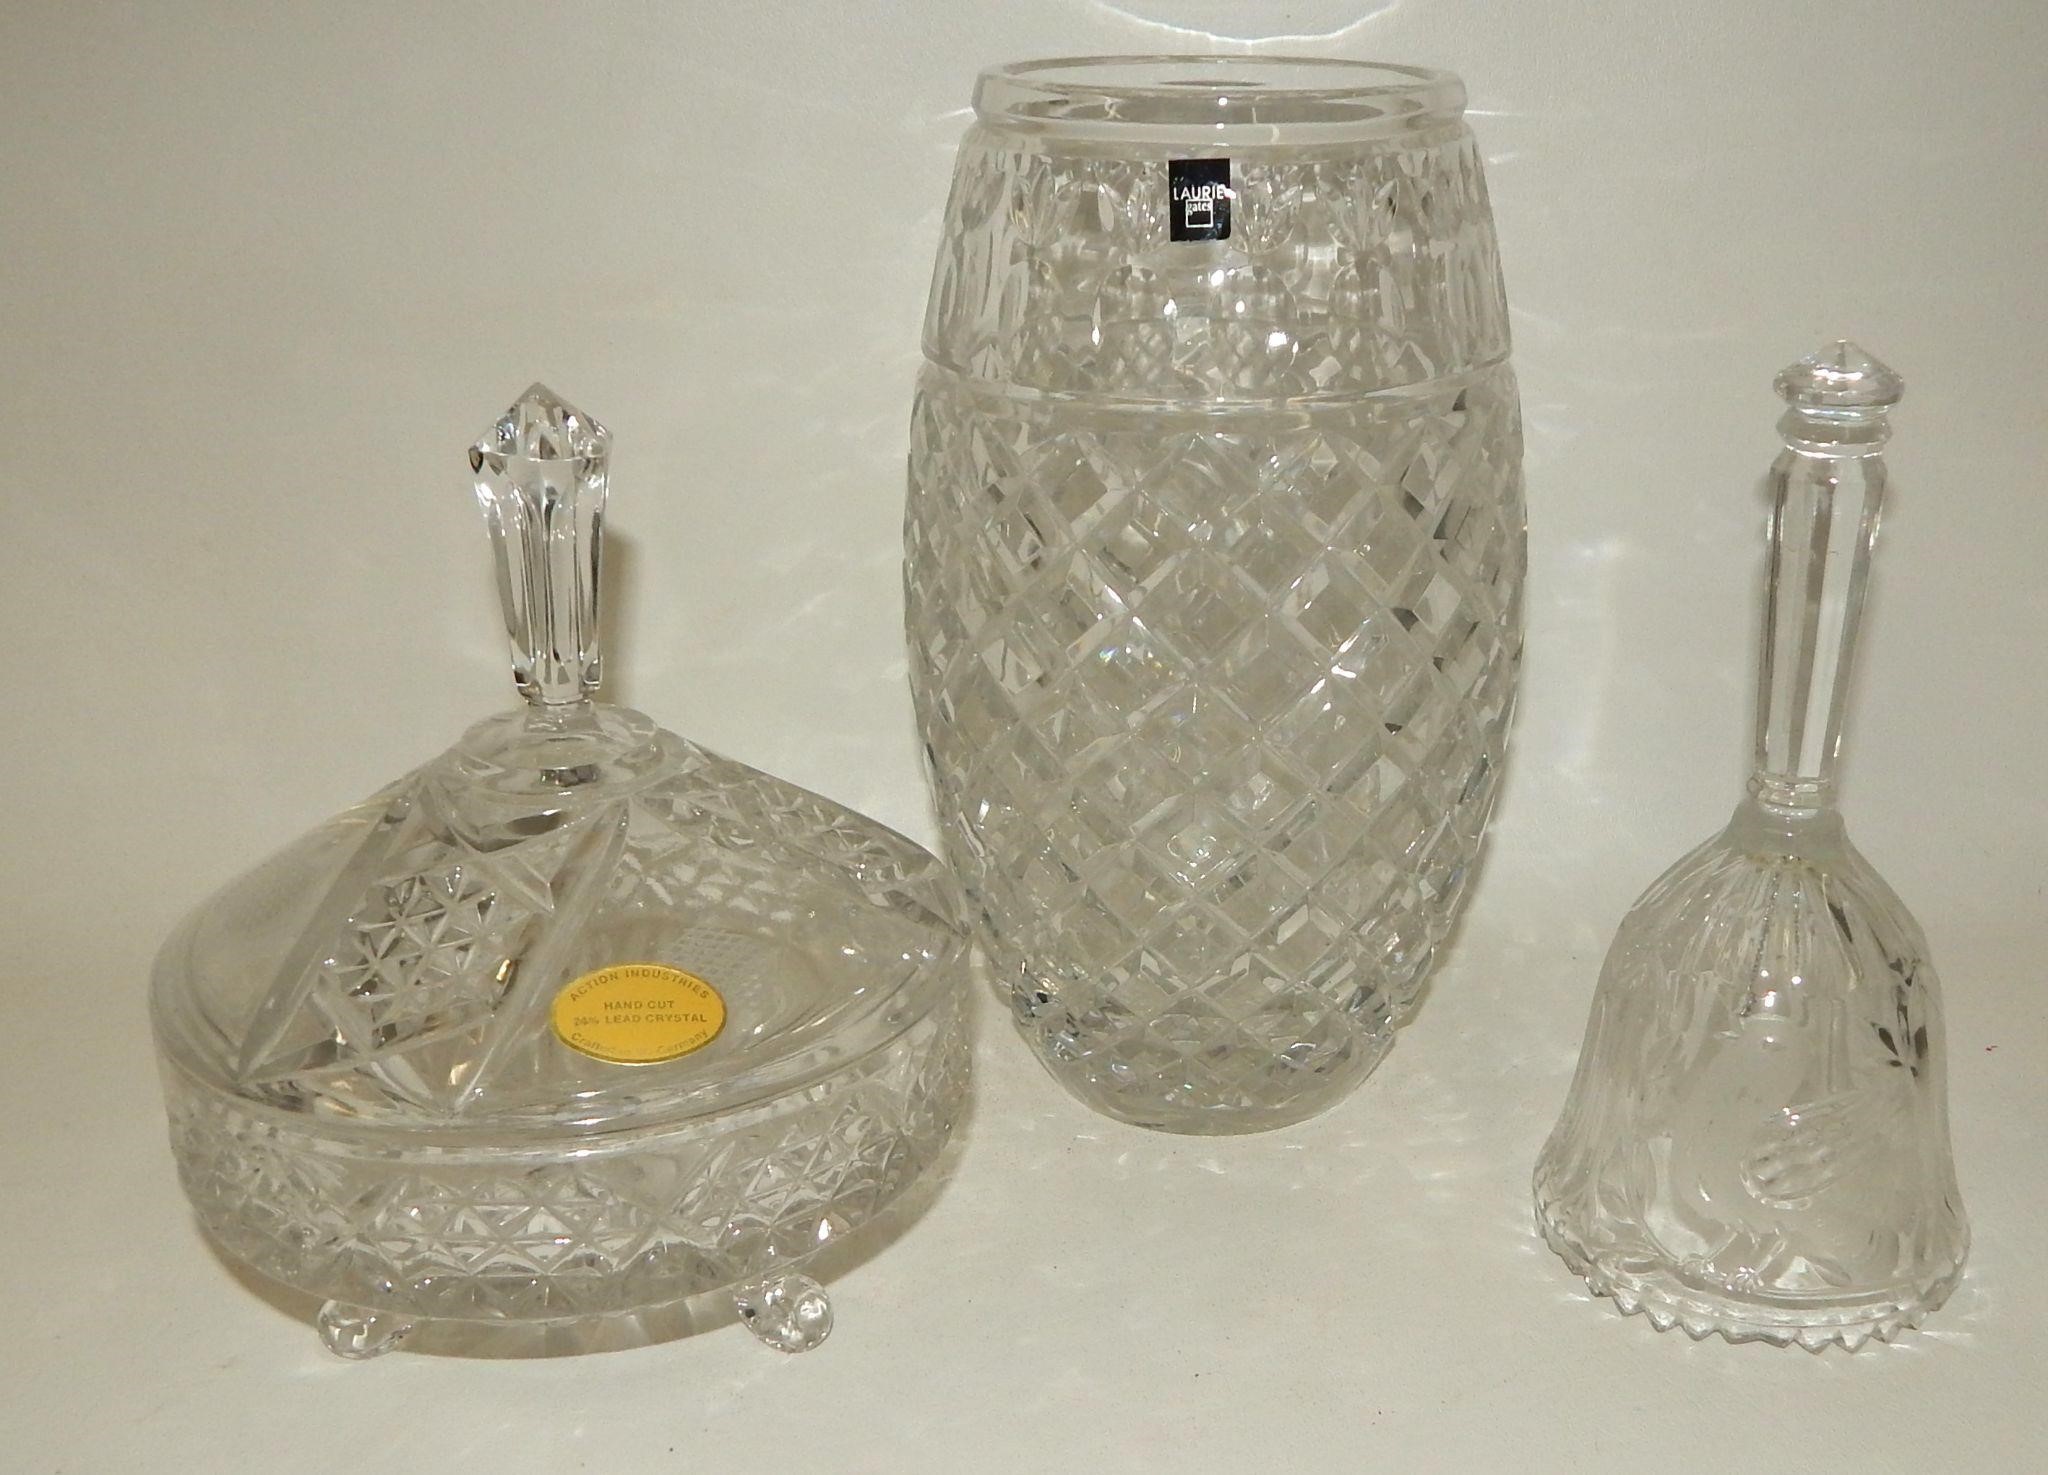 Collectibles Mid-Century Pottery Glassware Military Dolls